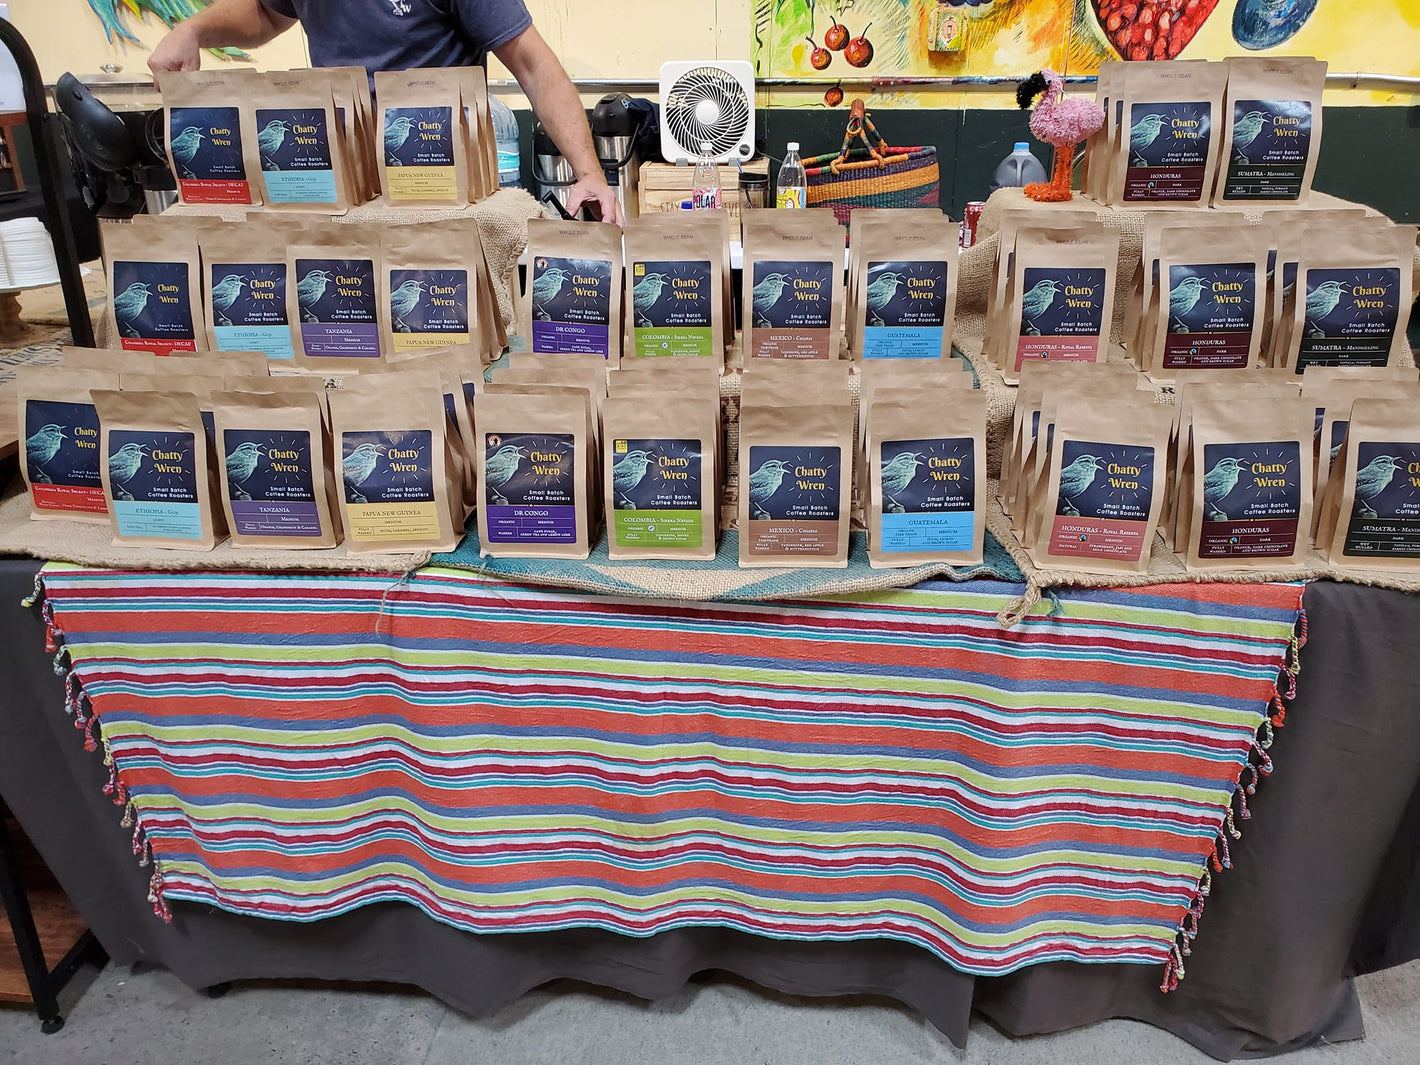 Table with dozens of coffee bags